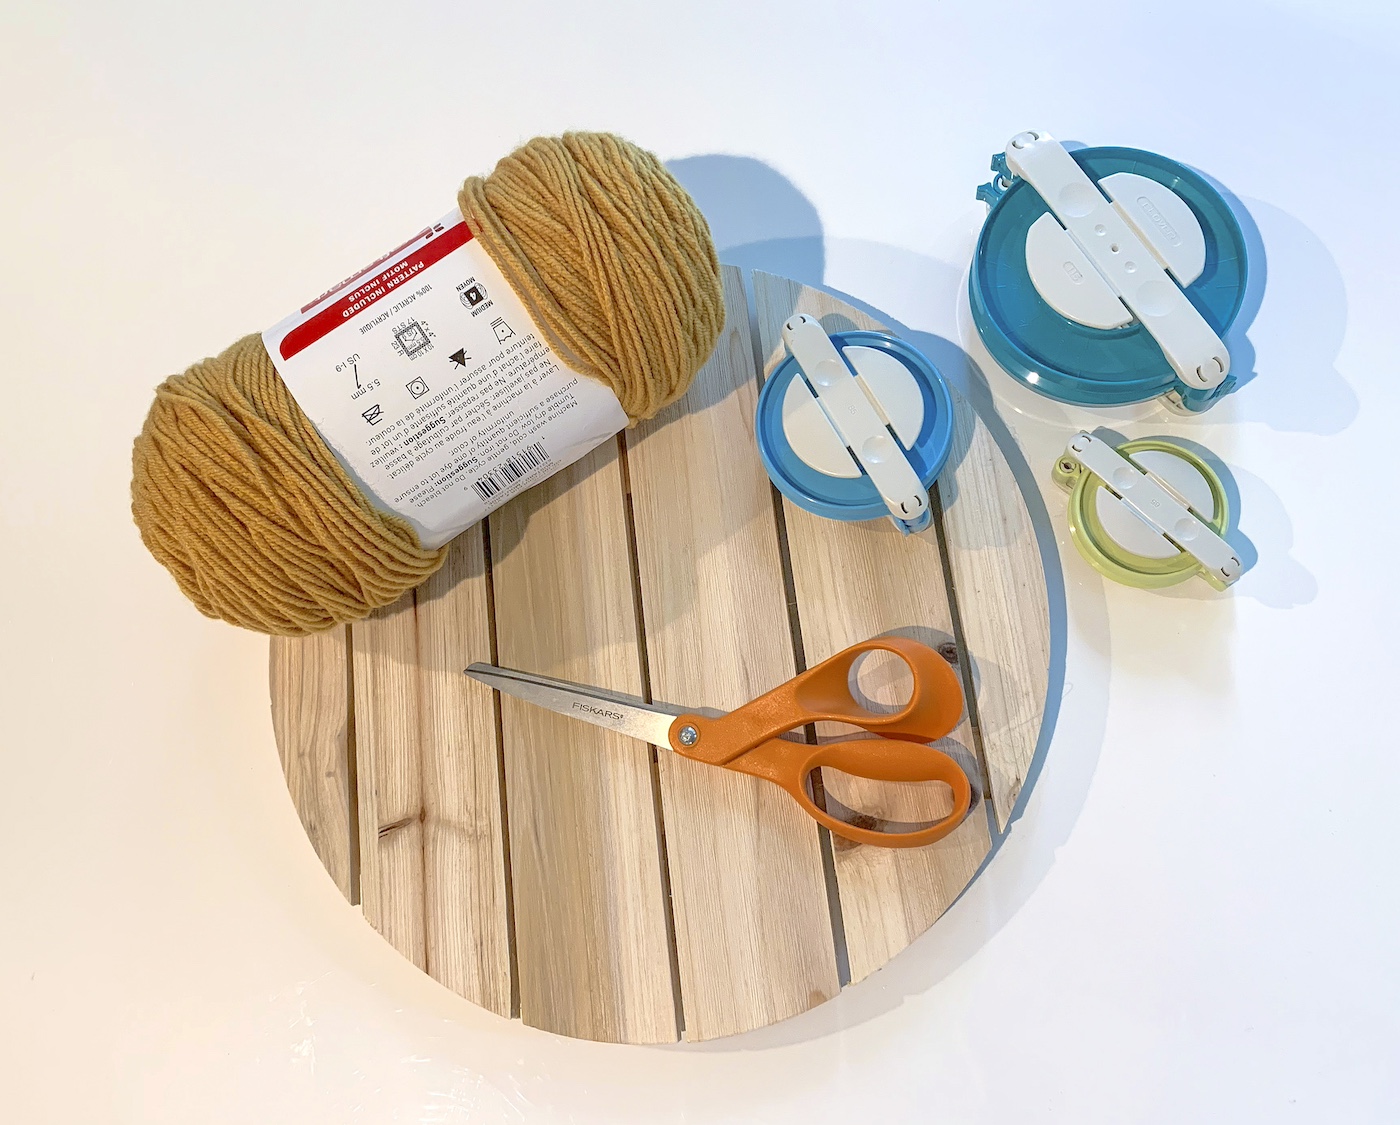 Wood plaque with scissors, pom pom makers, and yarn